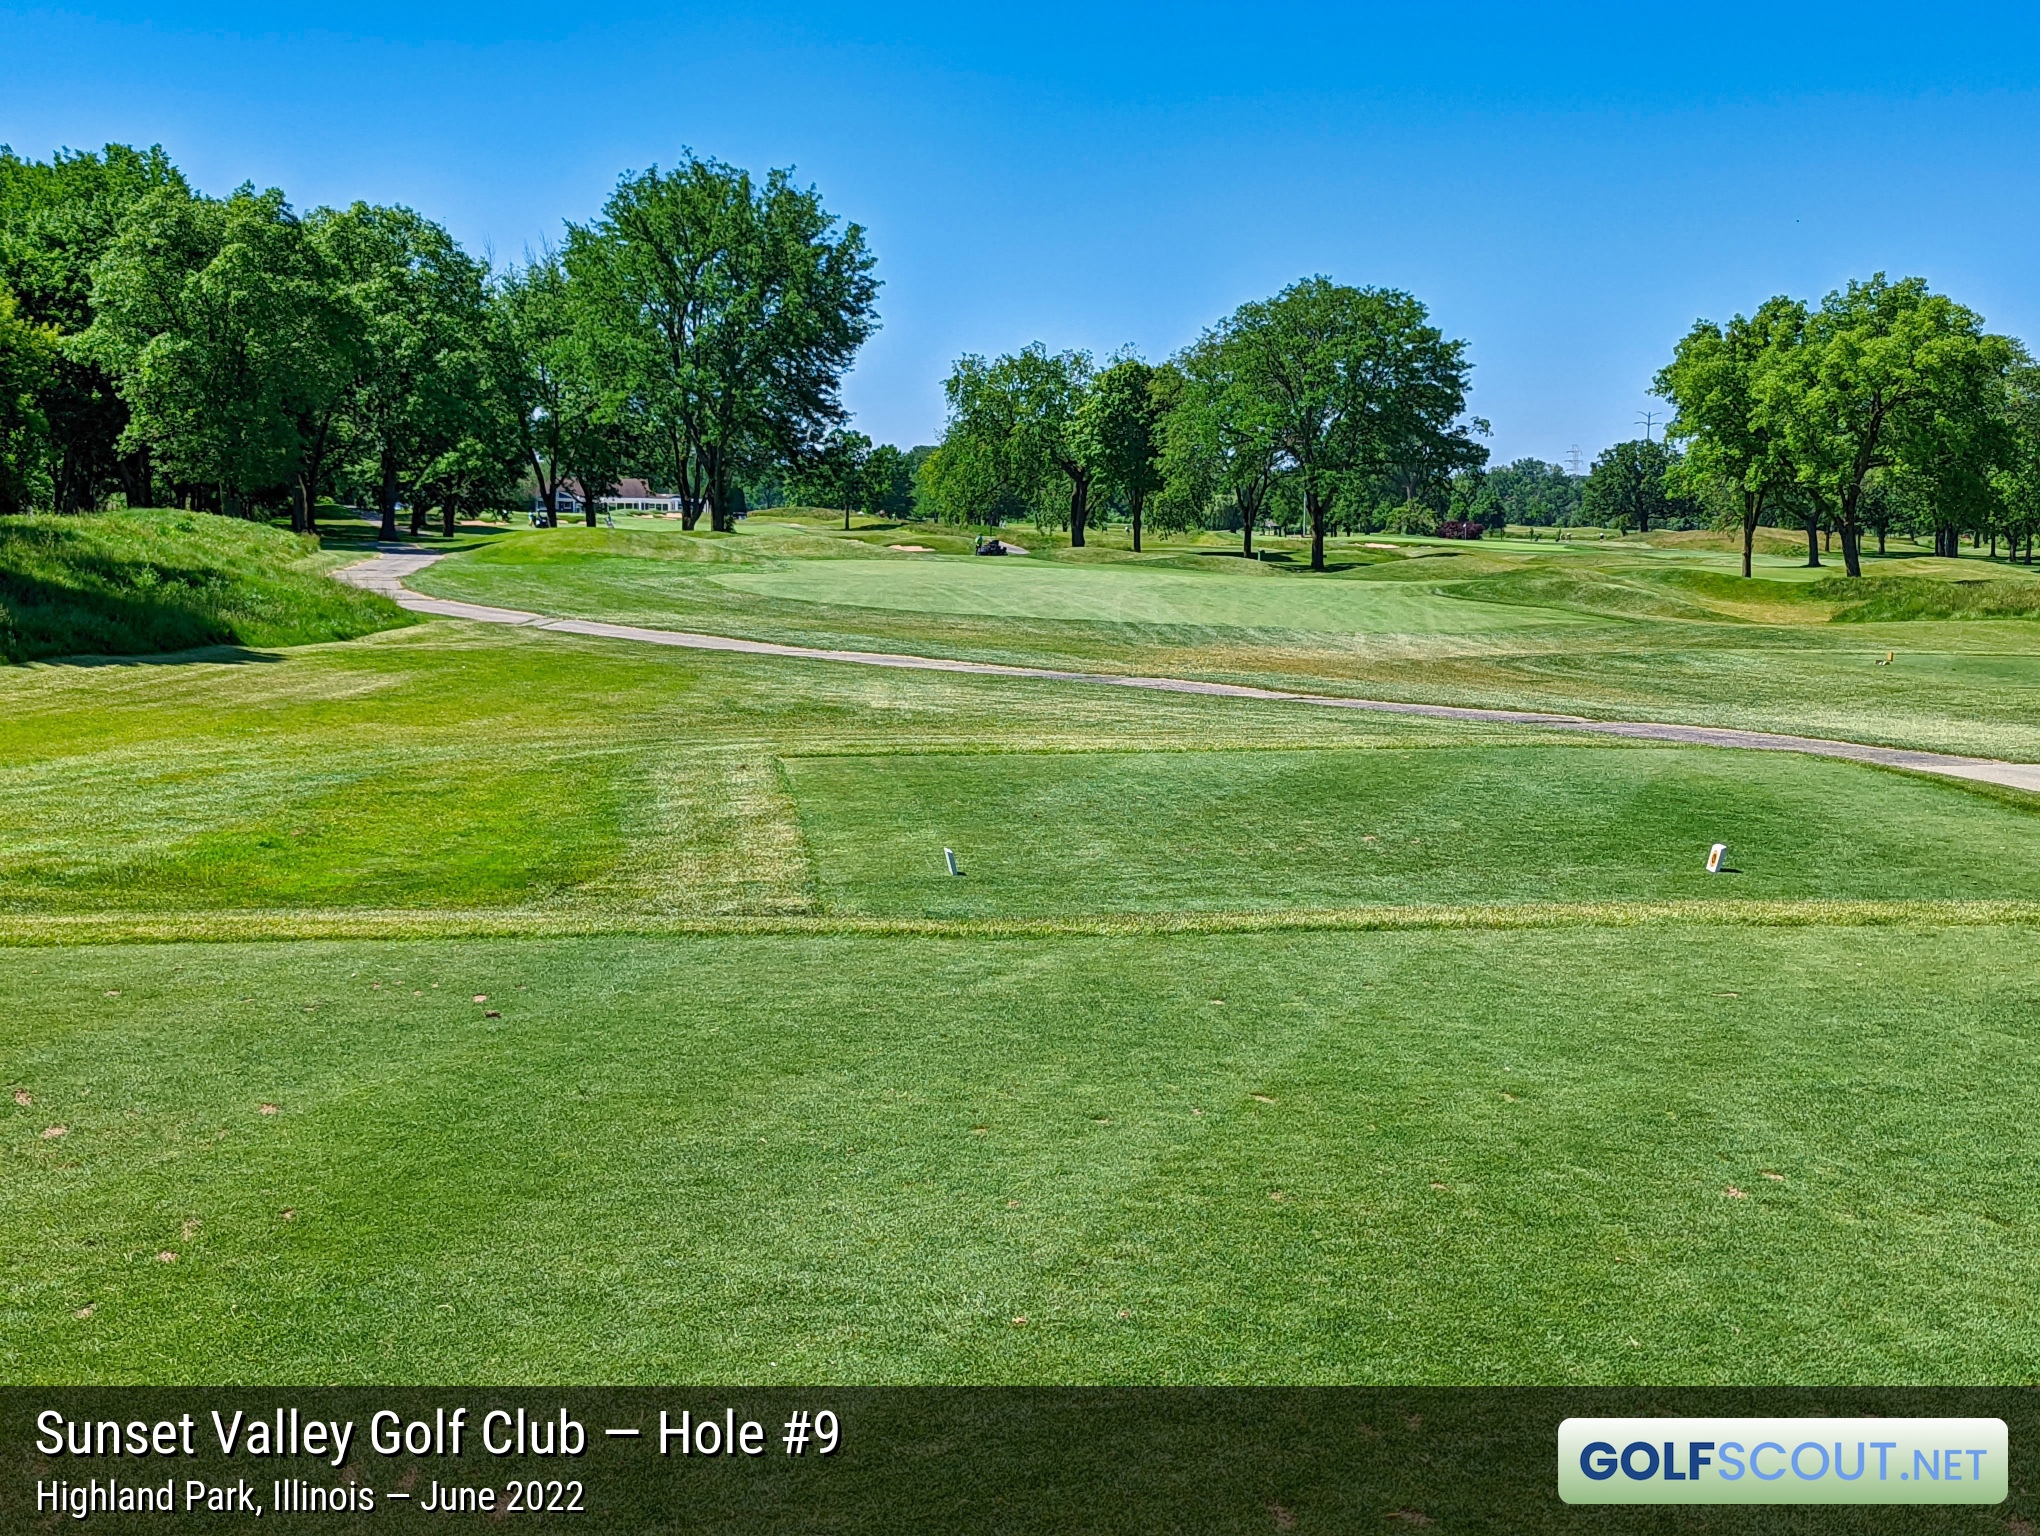 Photo of hole #9 at Sunset Valley Golf Club in Highland Park, Illinois. 